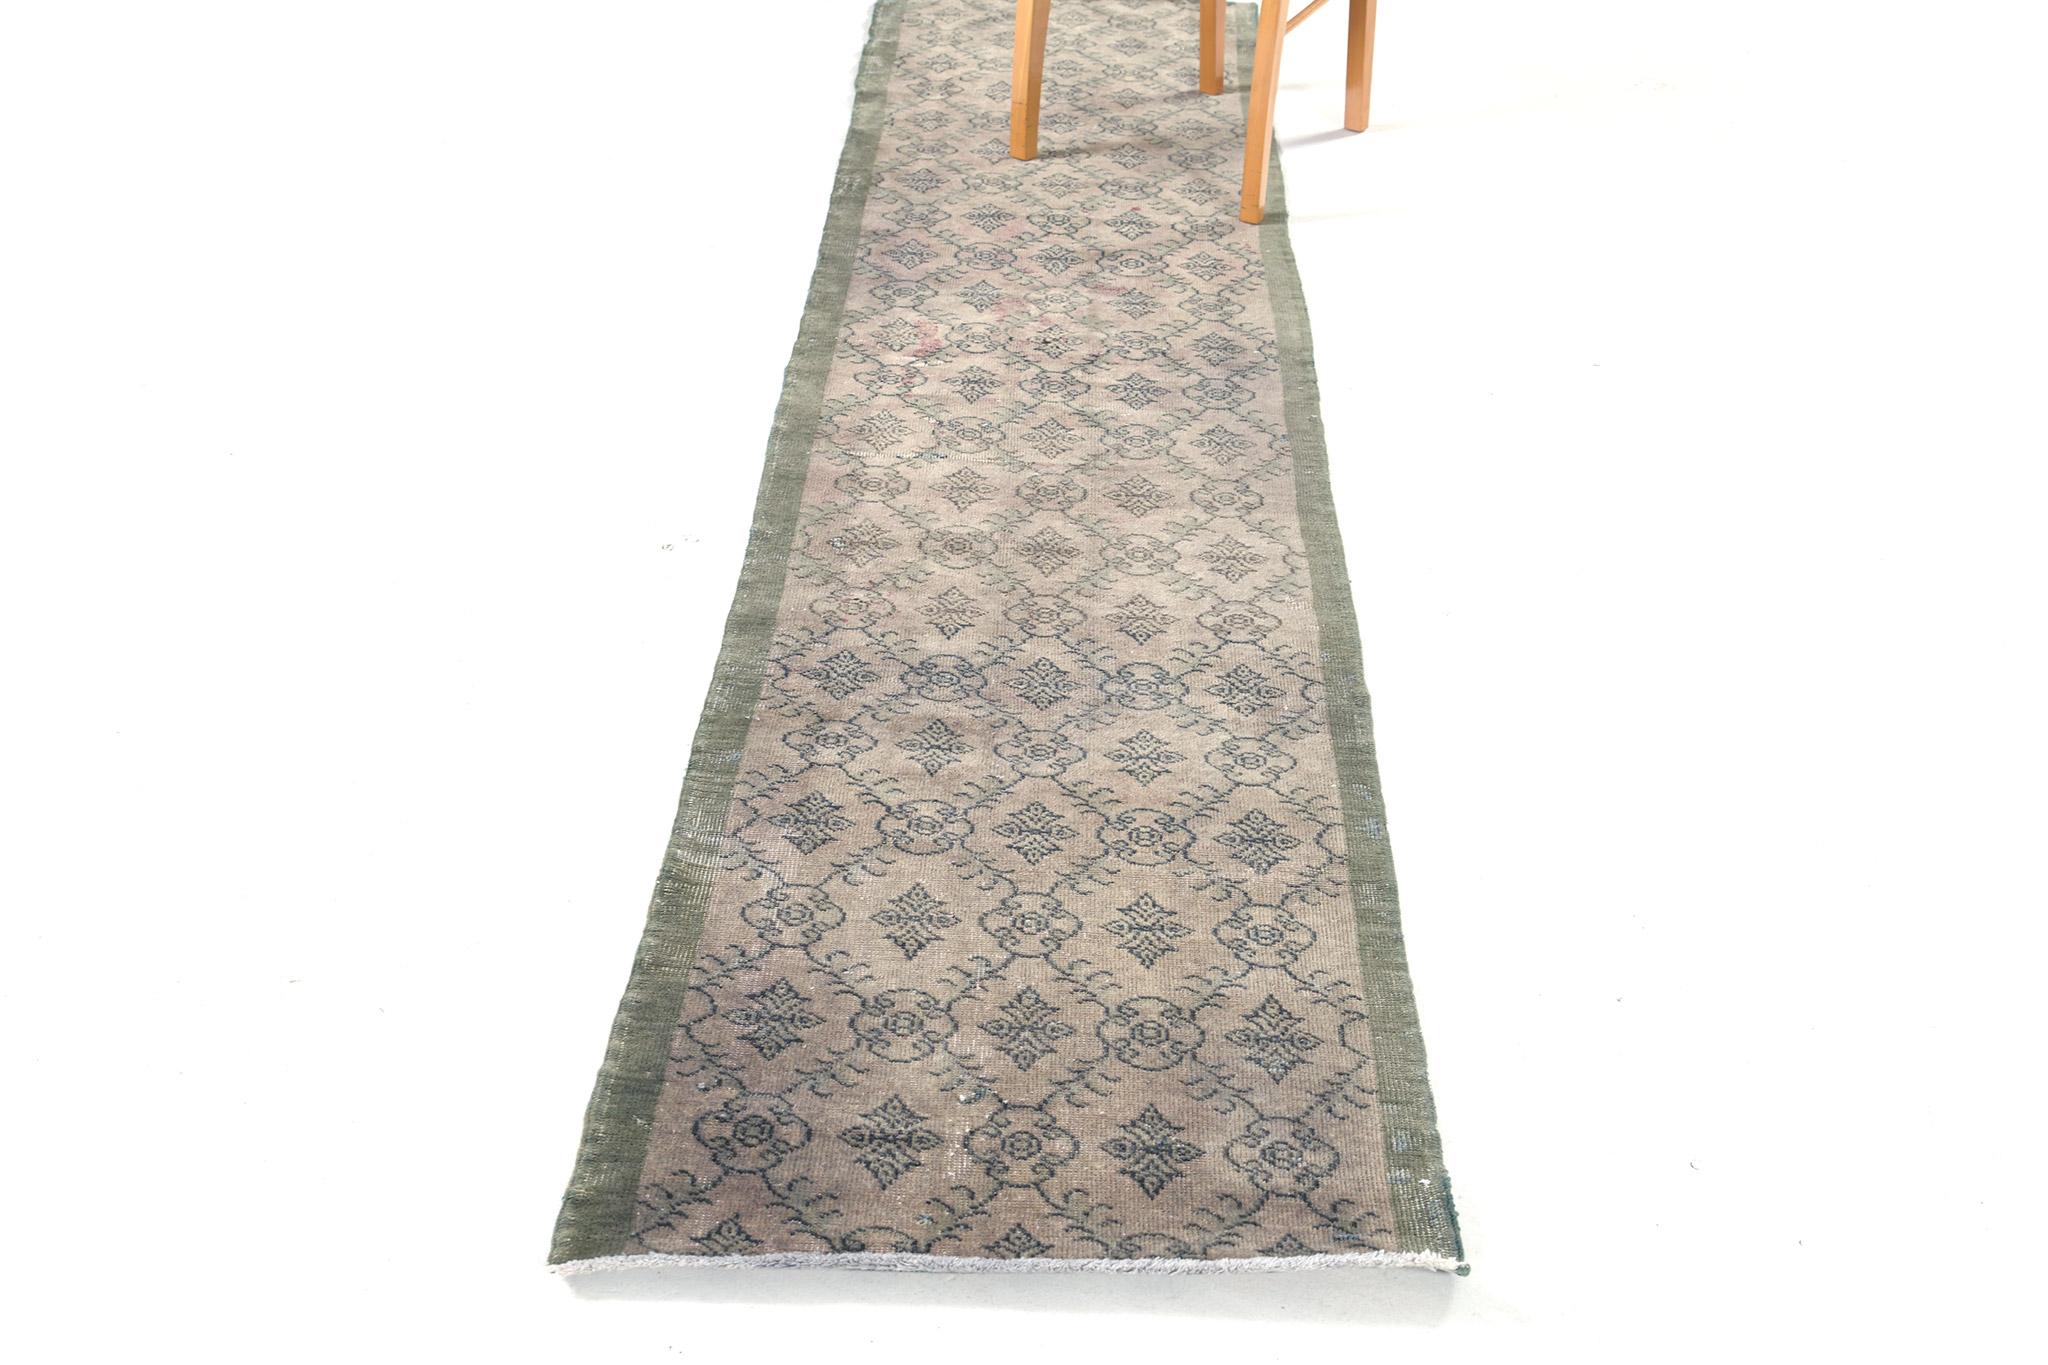 The effervescent sophistication and rustic colour scheme bring elegance to this Vintage Turkish Anatolian runner. It embodies an allover interconnected botanical pattern that features the series of florid lozenge trellis gracefully spread over this